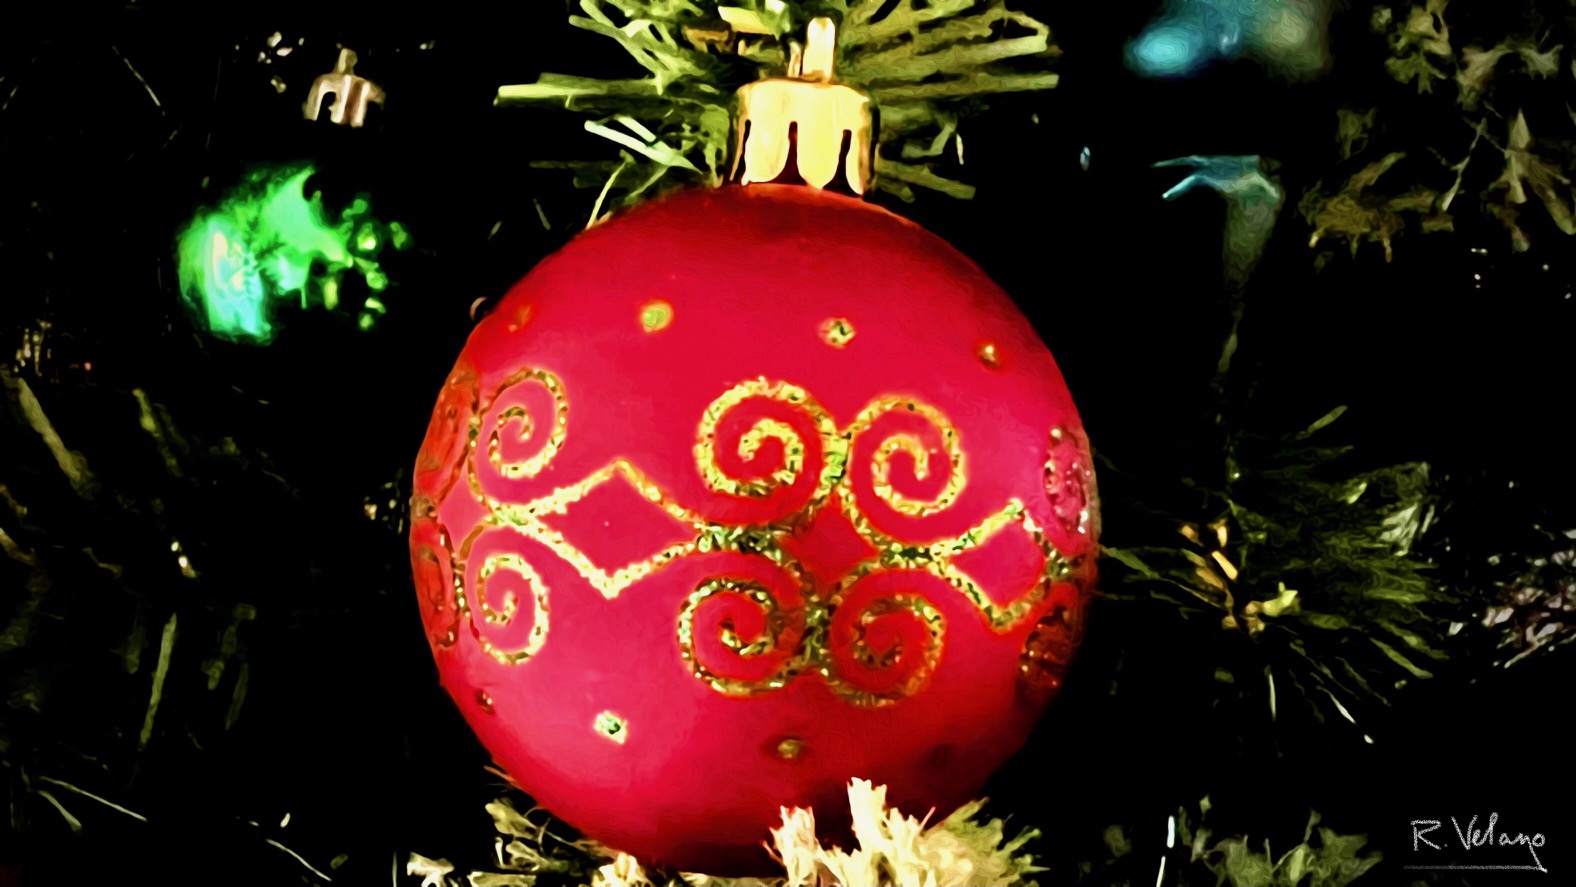 "RED CHRISTMAS BALL WITH DECORATIVE GOLD INLAY" [Created: 11/23/2021]